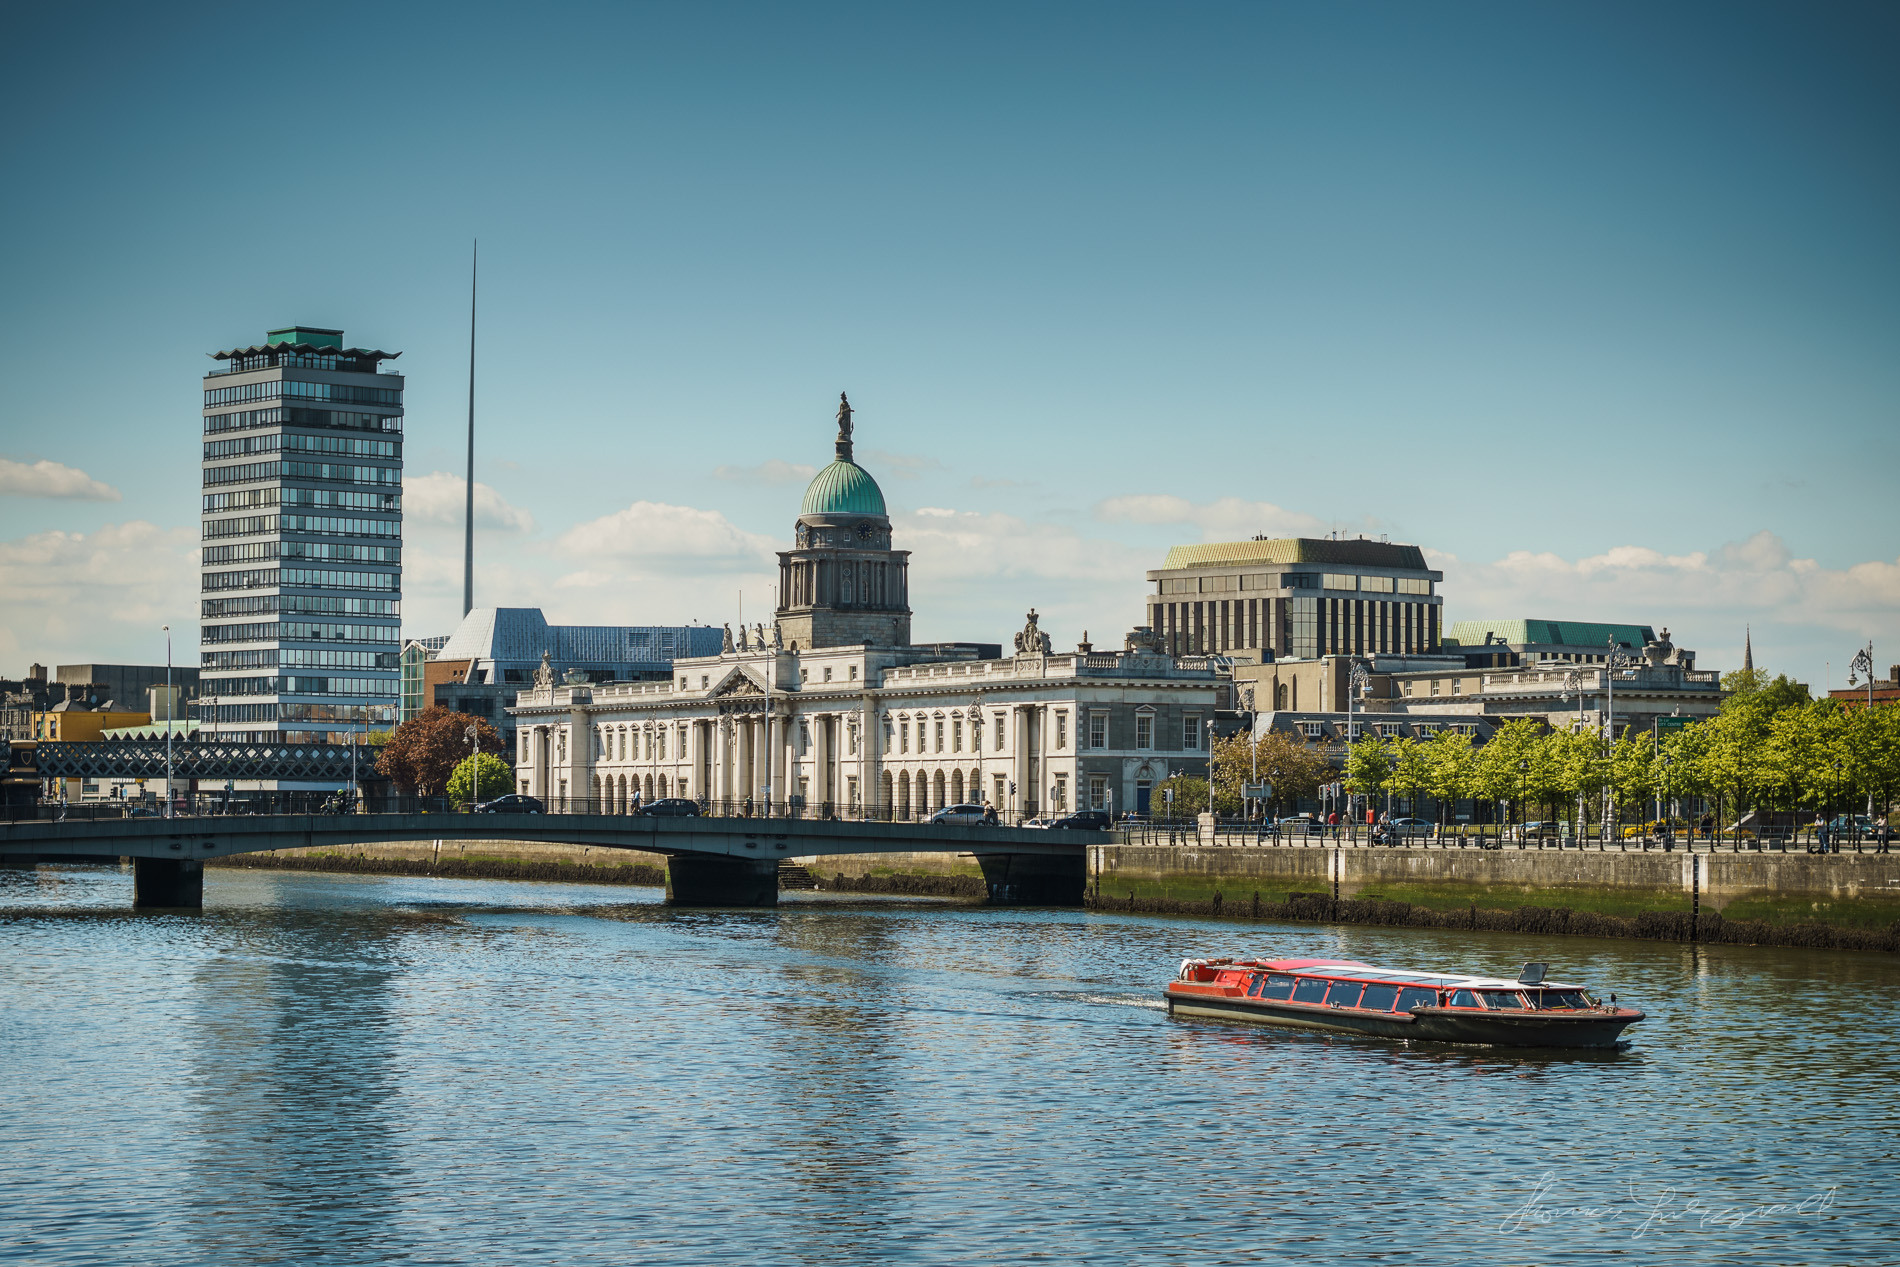 A tourist boat travels along the river liffey